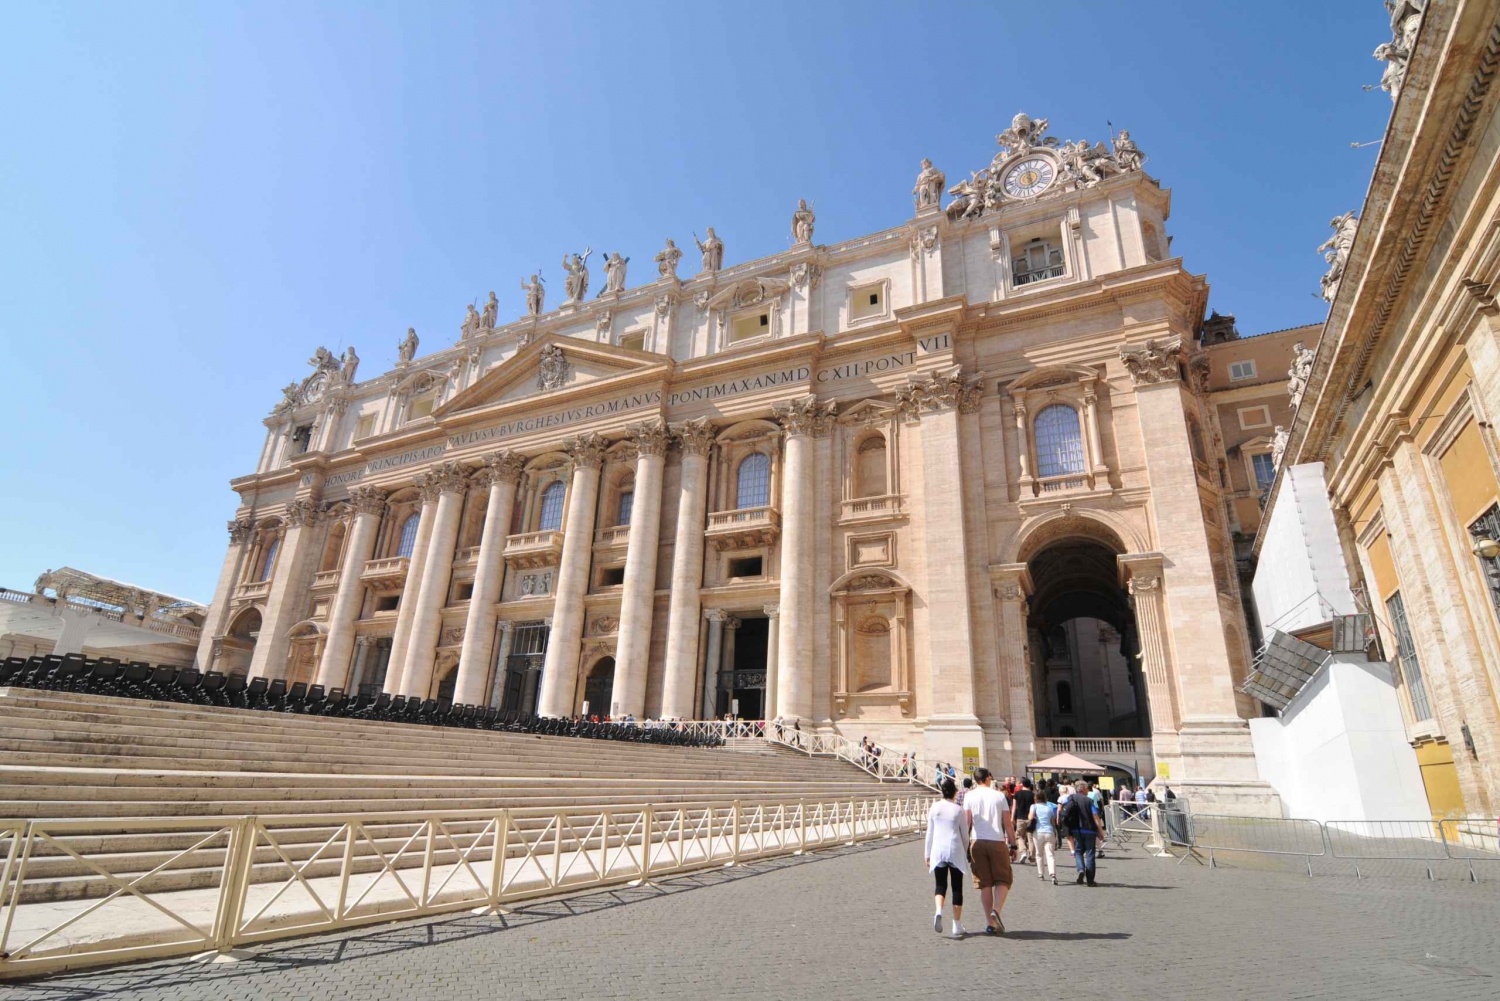 Vatican: Official Guided Tour of St. Peter's Basilica